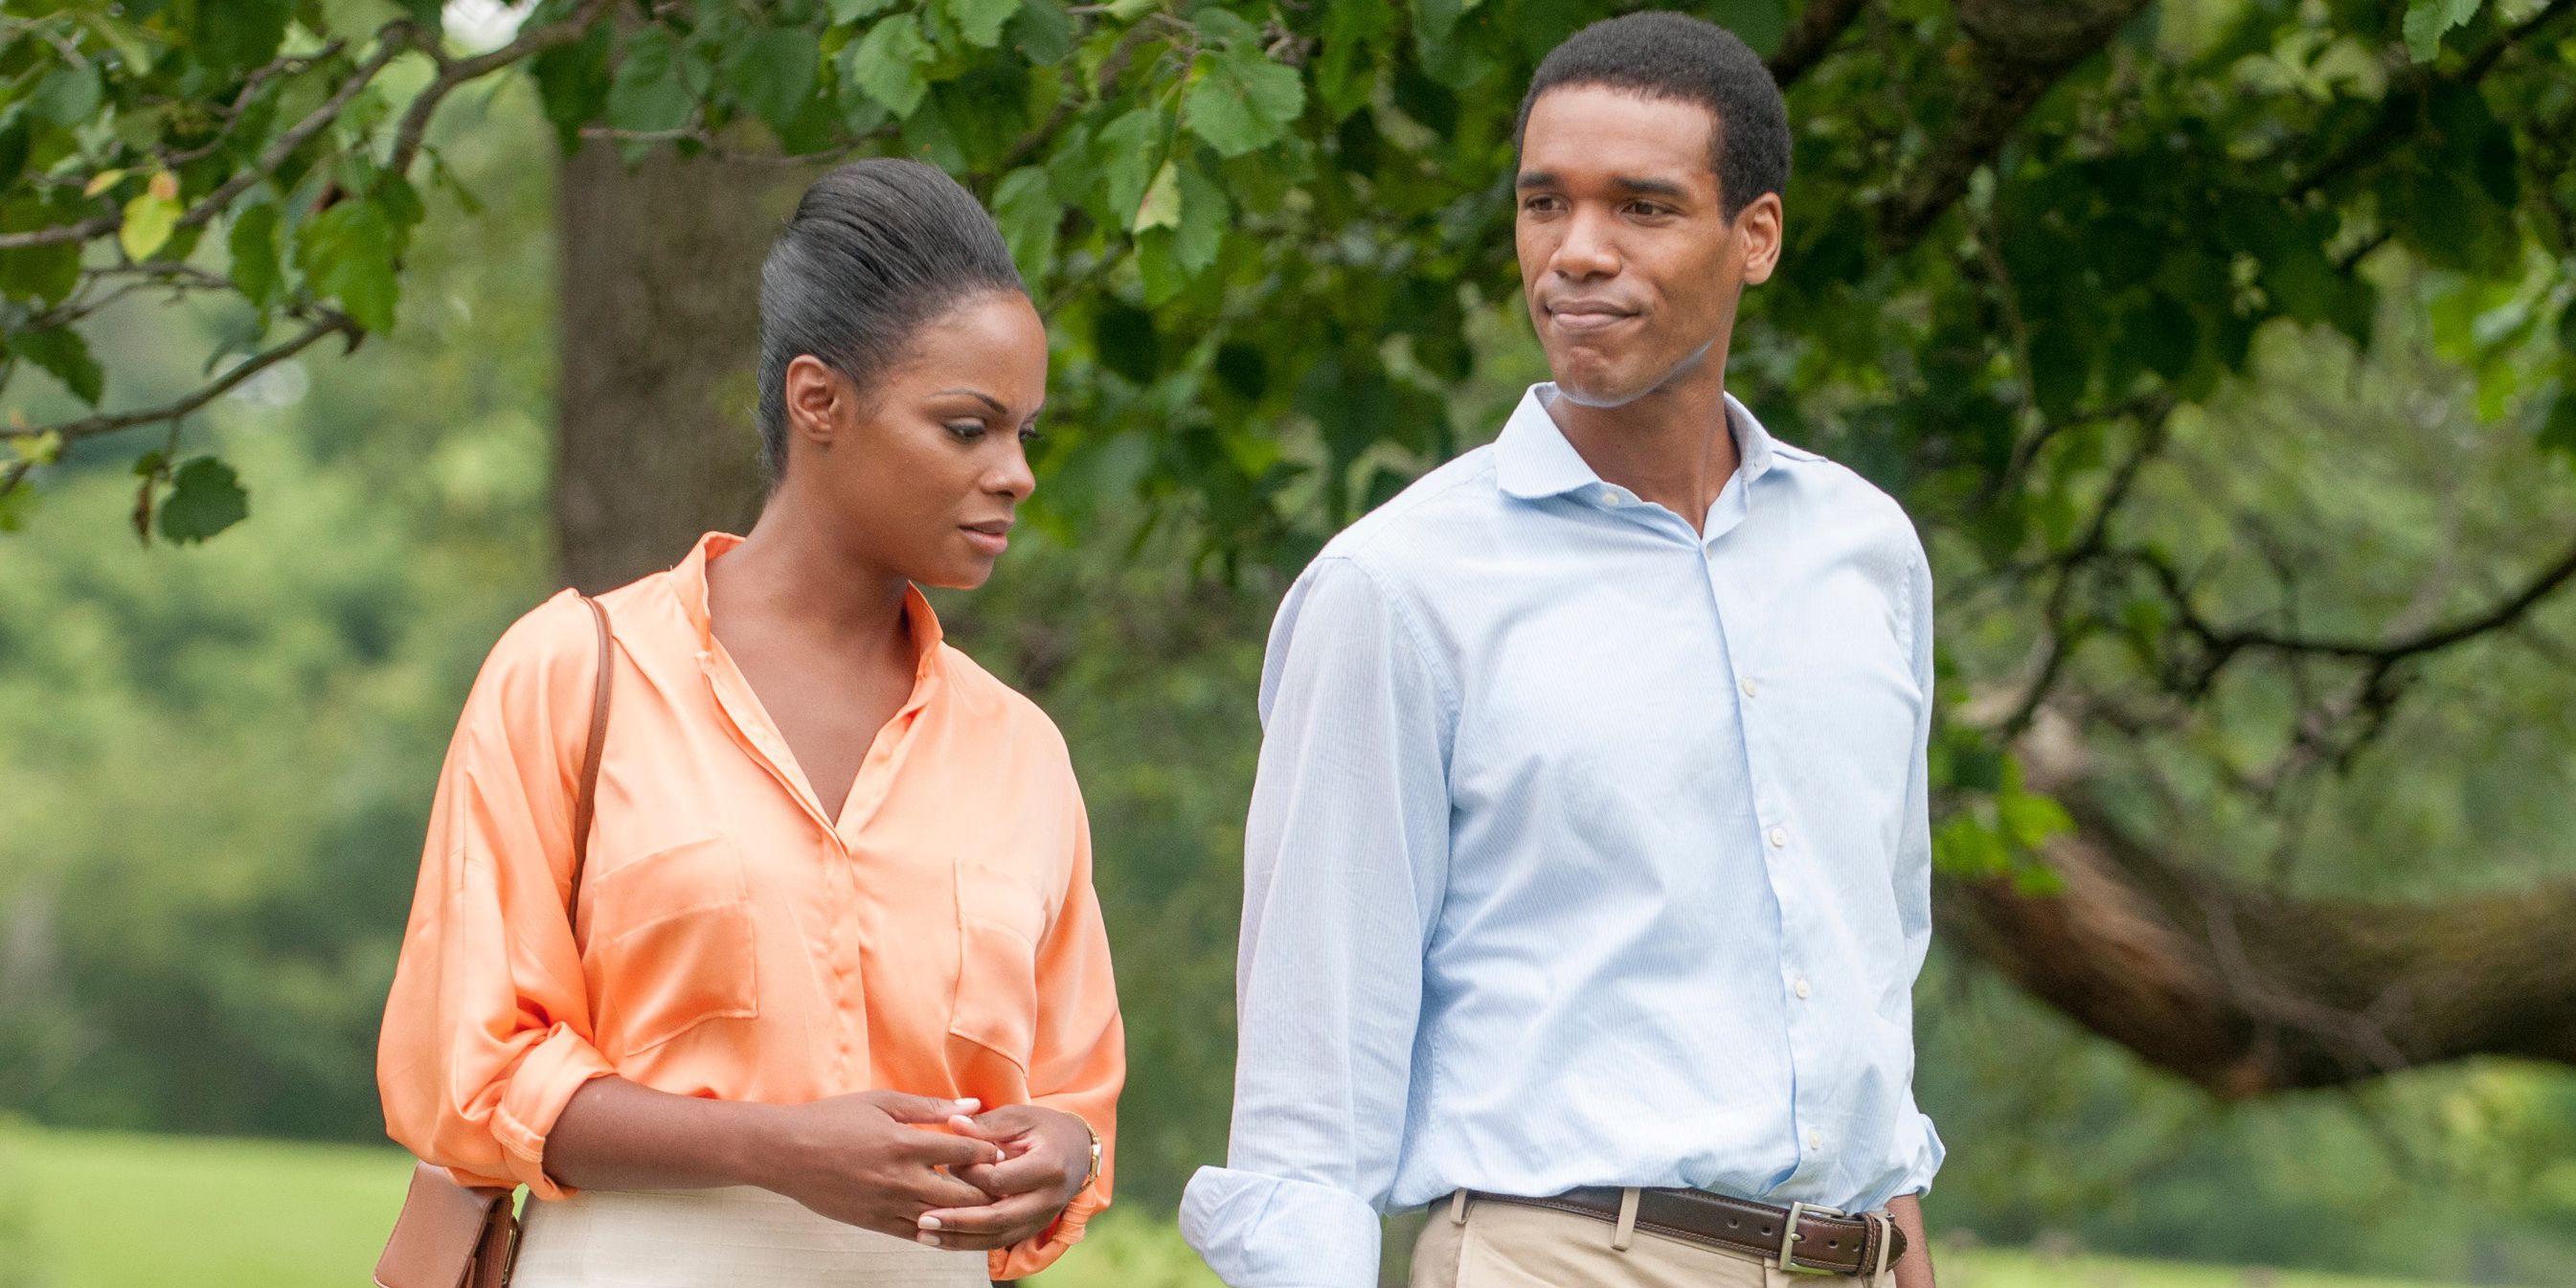 A still from the film Southside With You featuring Parker Sawyers and Tika Sumpter as a young Barack and Michelle Obama